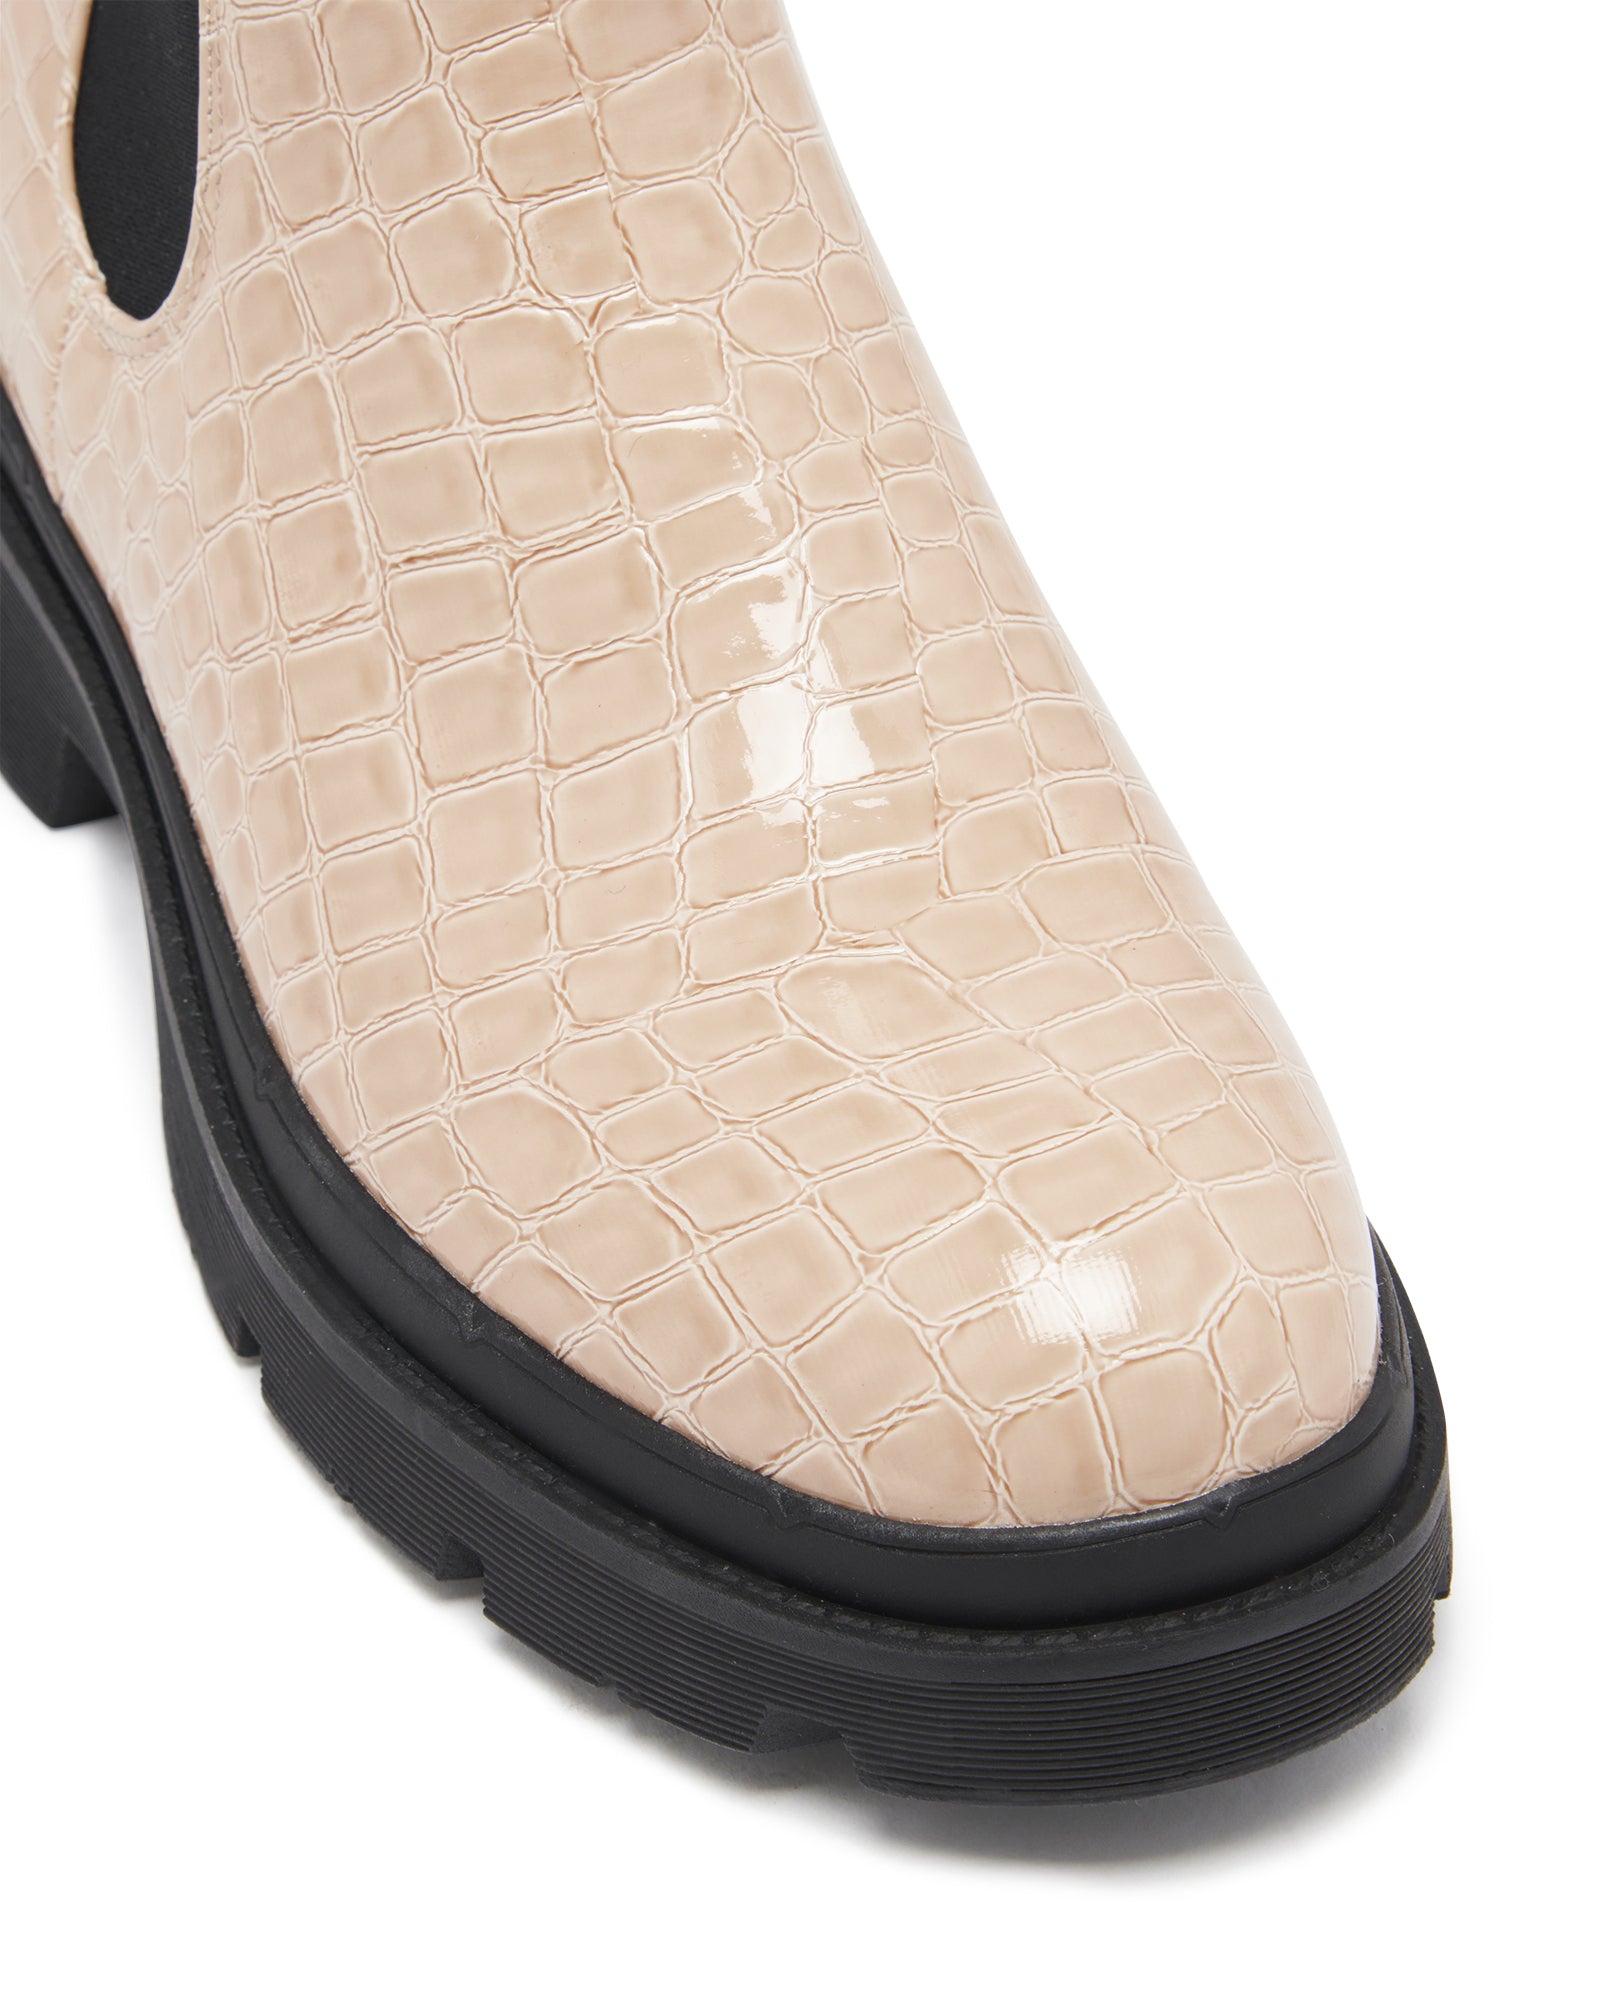 Therapy Shoes Threadbo Bone Croc | Women's Boots | Ankle | Chunky | 90's